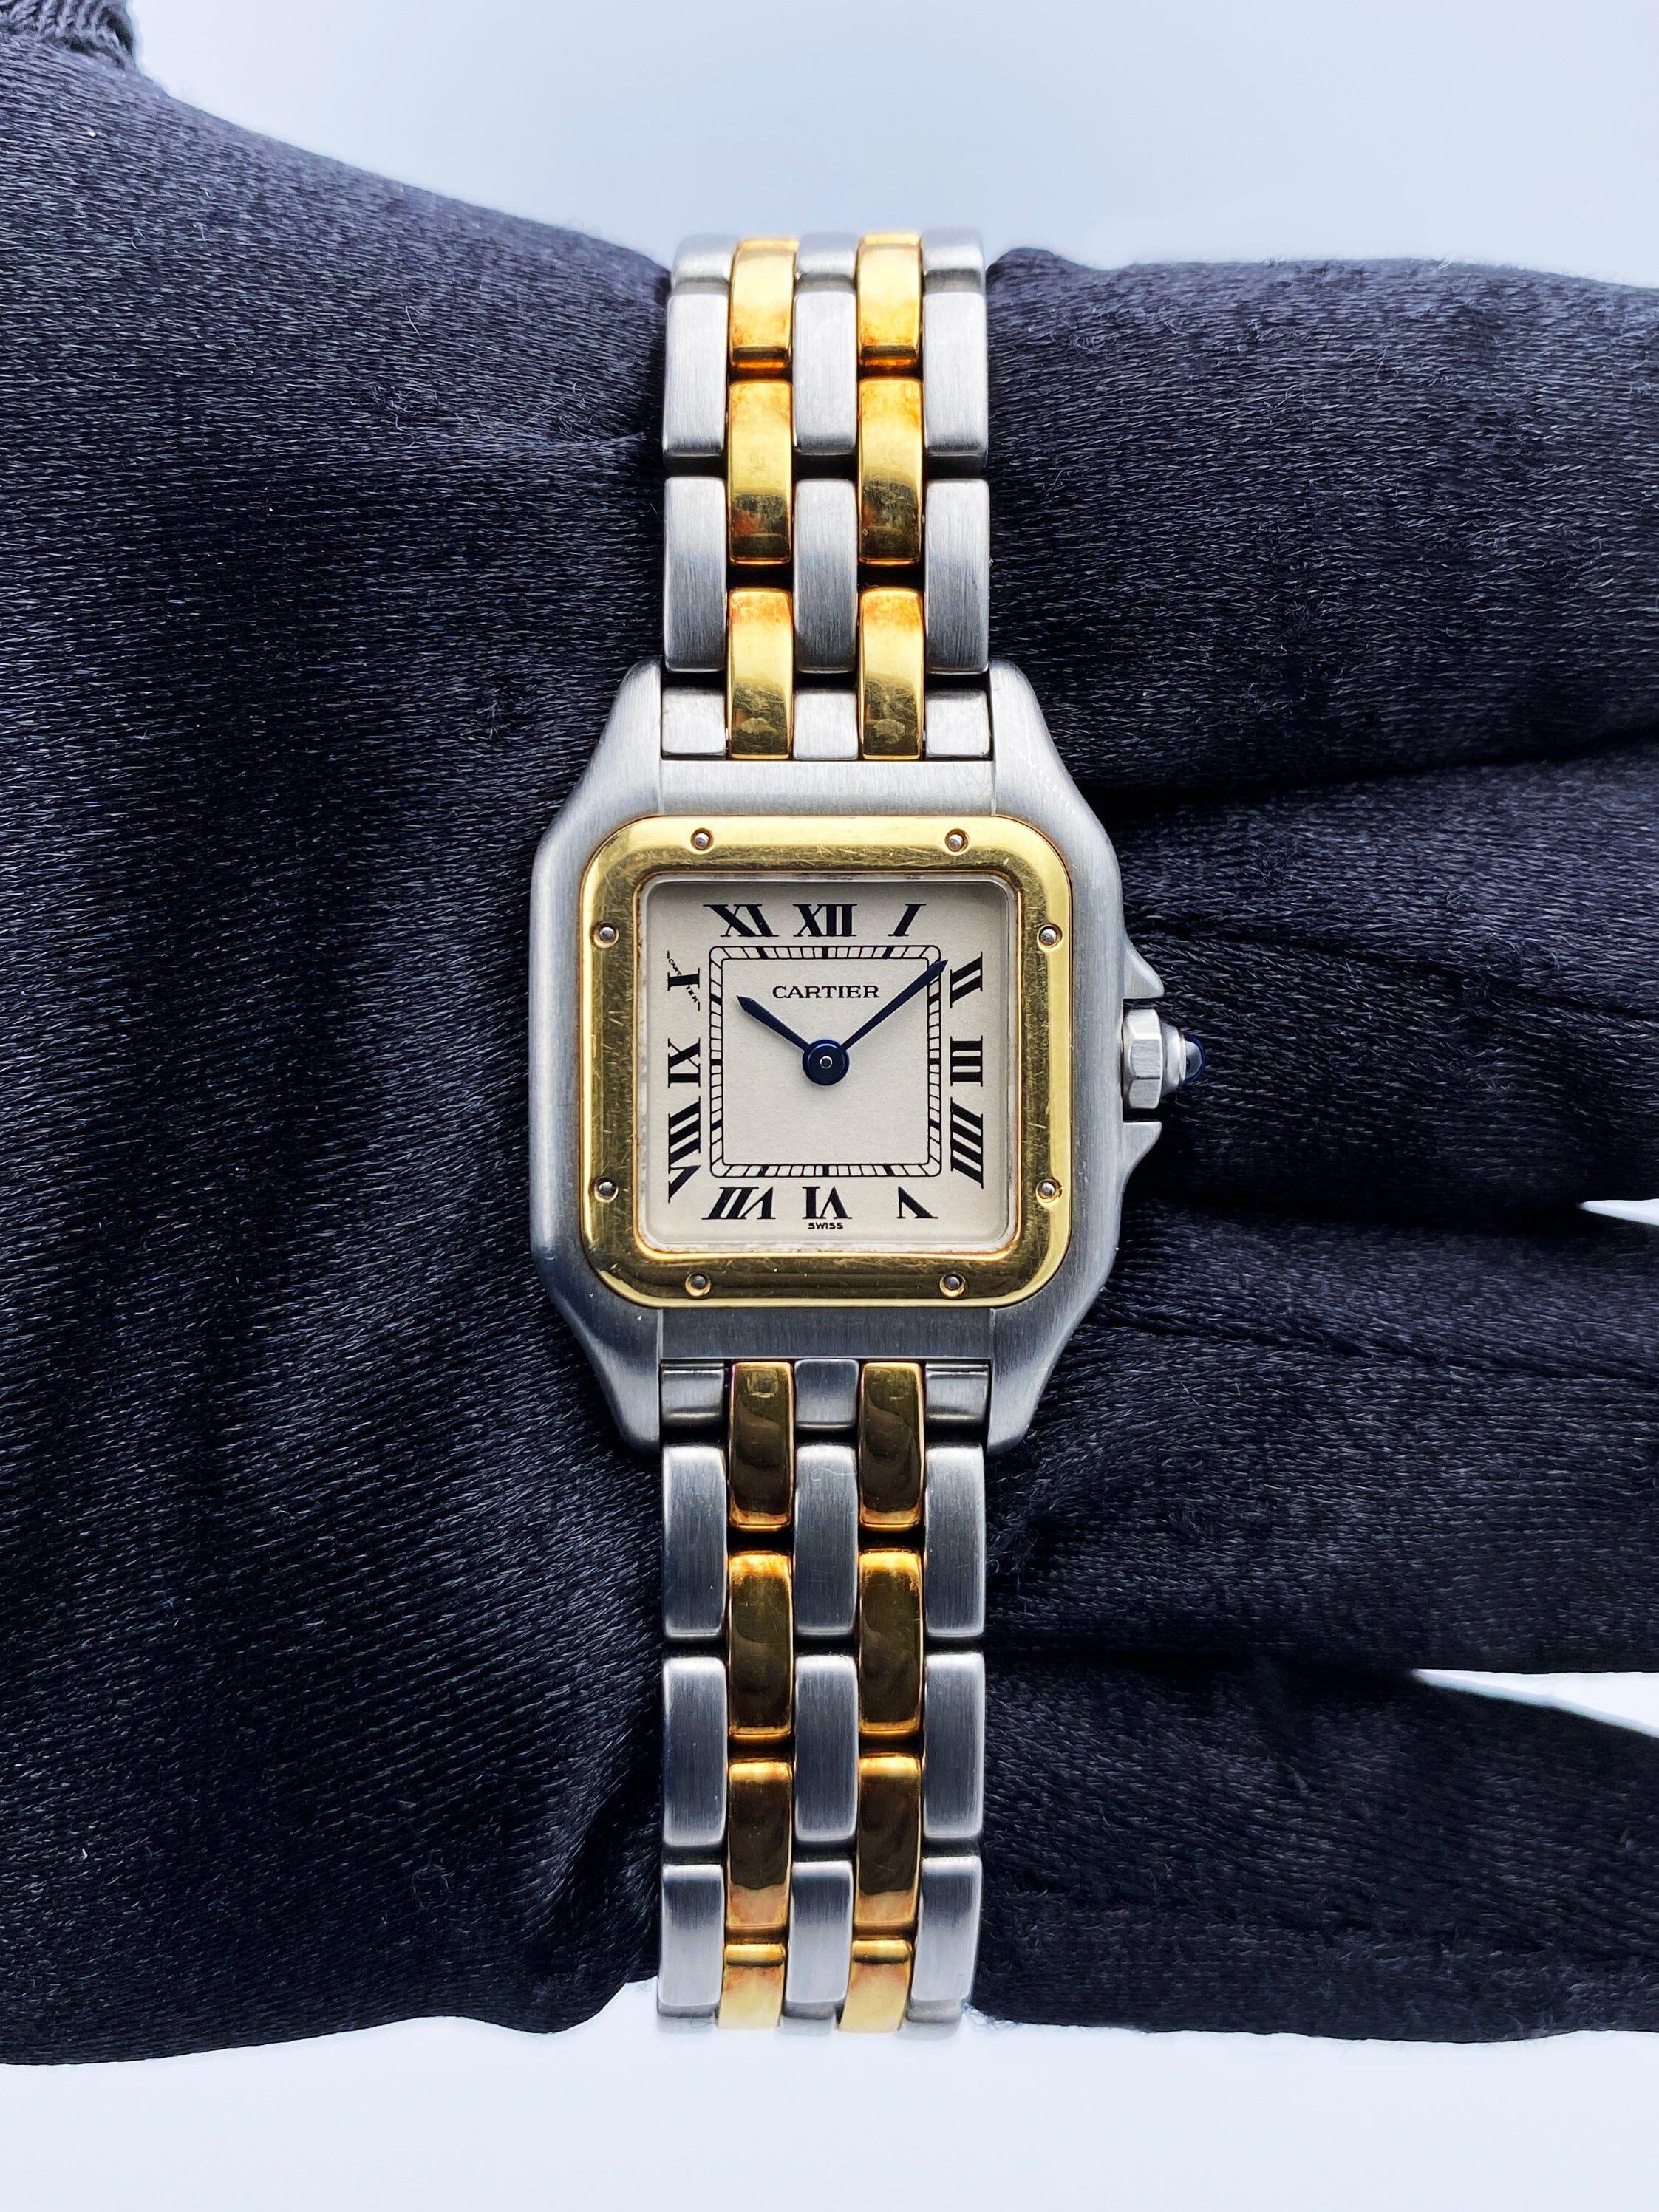 Cartier Panthere W25029B6 / 1120 Ladies Watch. 22mm stainless steel case. 18K yellow gold bezel. Off-White dial with blue steel hands and Roman numeral hour markers. Minute markers on the inner dial. Stainless steel & two rows of 18K yellow gold